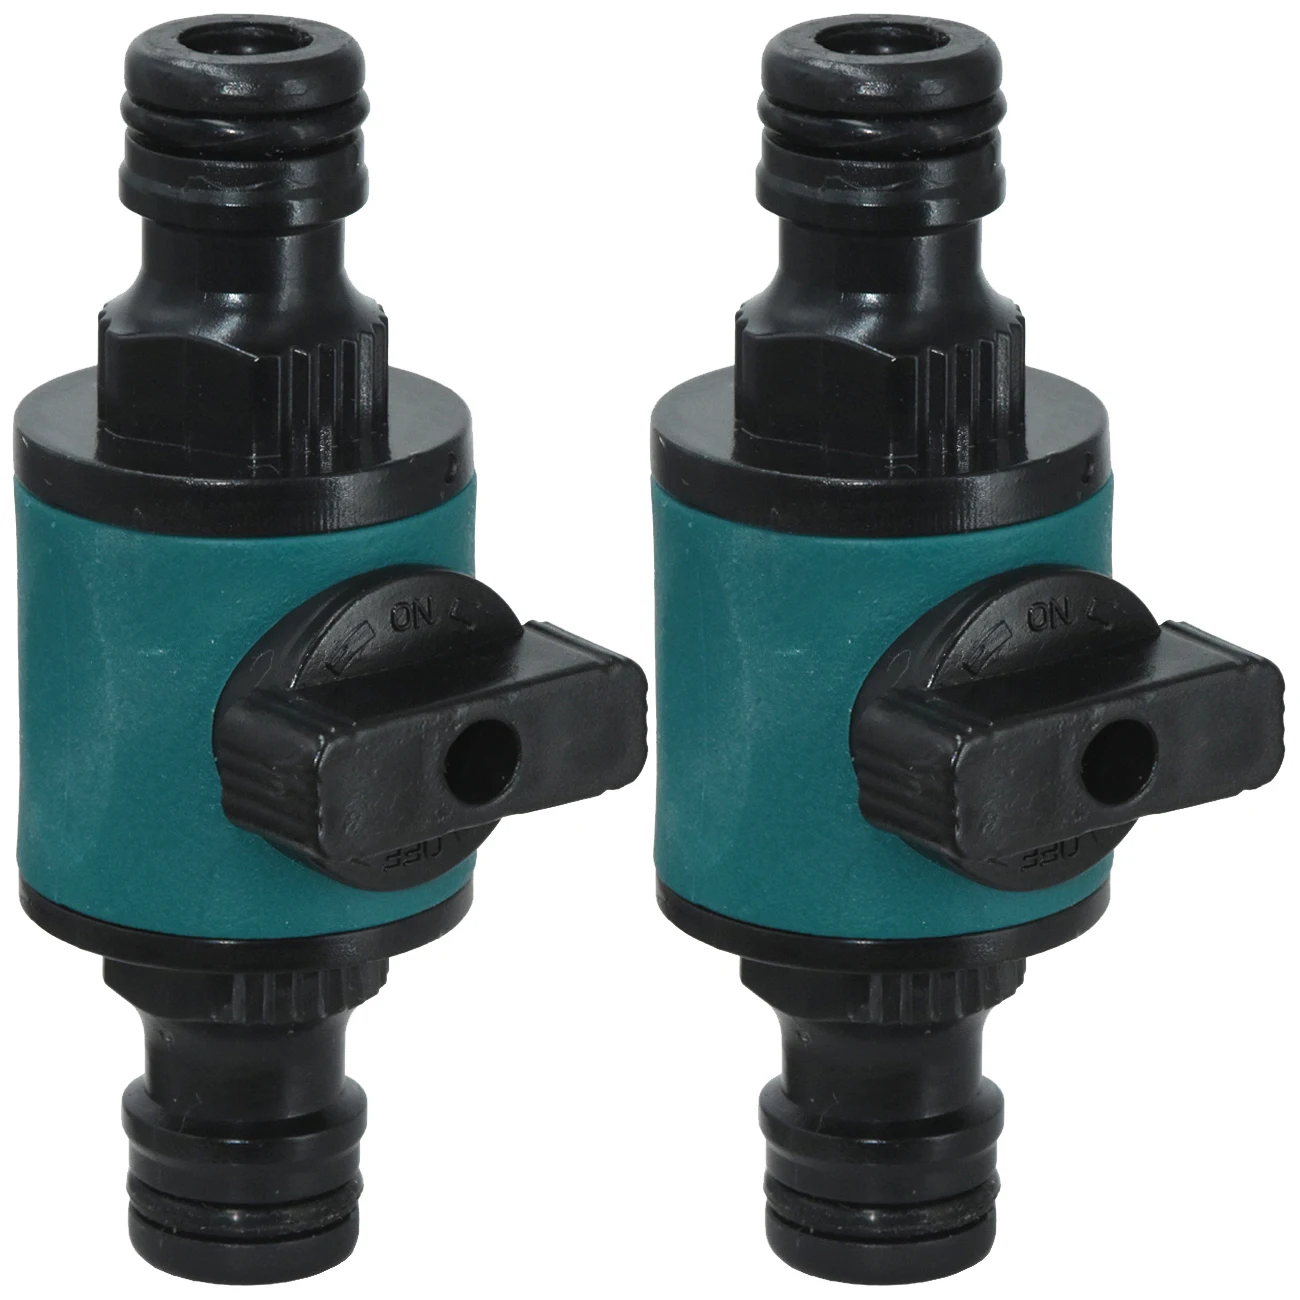 

KESLA 2PCS 16MM Garden Equal Hose Connector Repair w/ Shut Off Valve Tubing Tap Adapter Quick Joint for Watering Irrigation